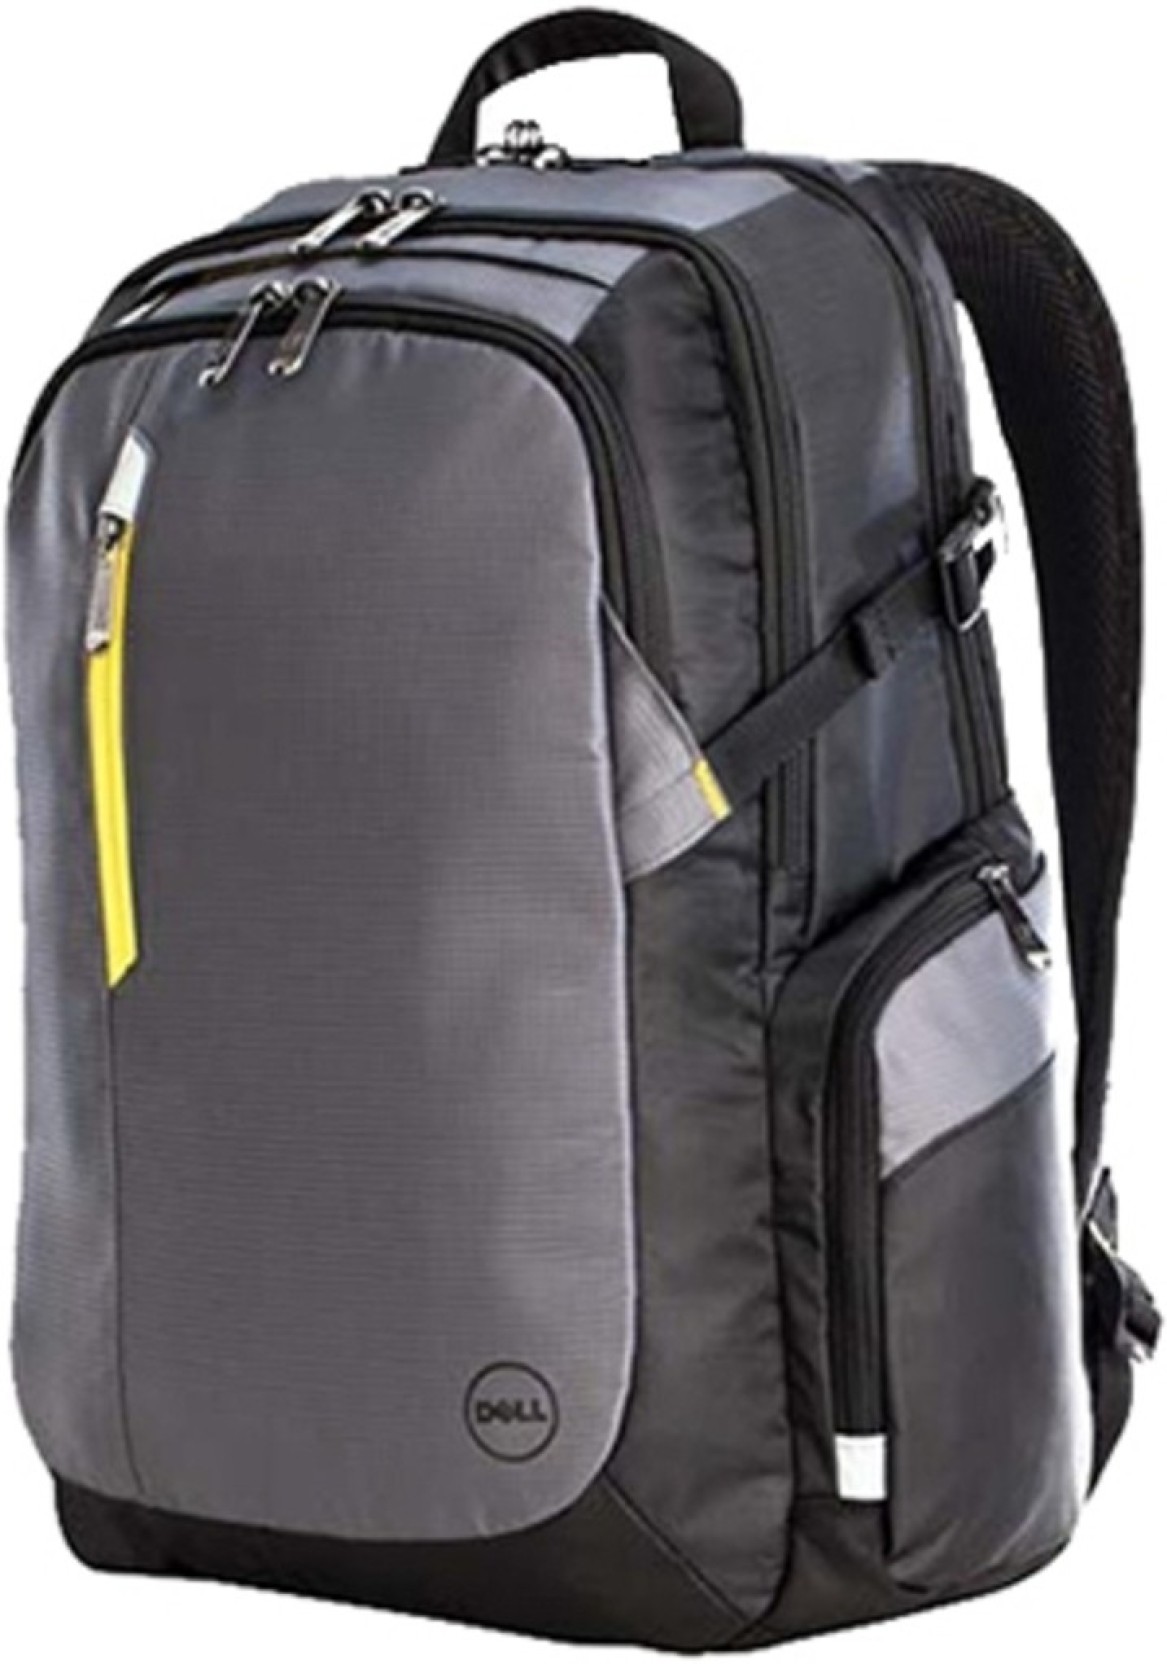 Dell 15 inch Laptop Backpack 5YJ6D - Price in India | www.semadata.org